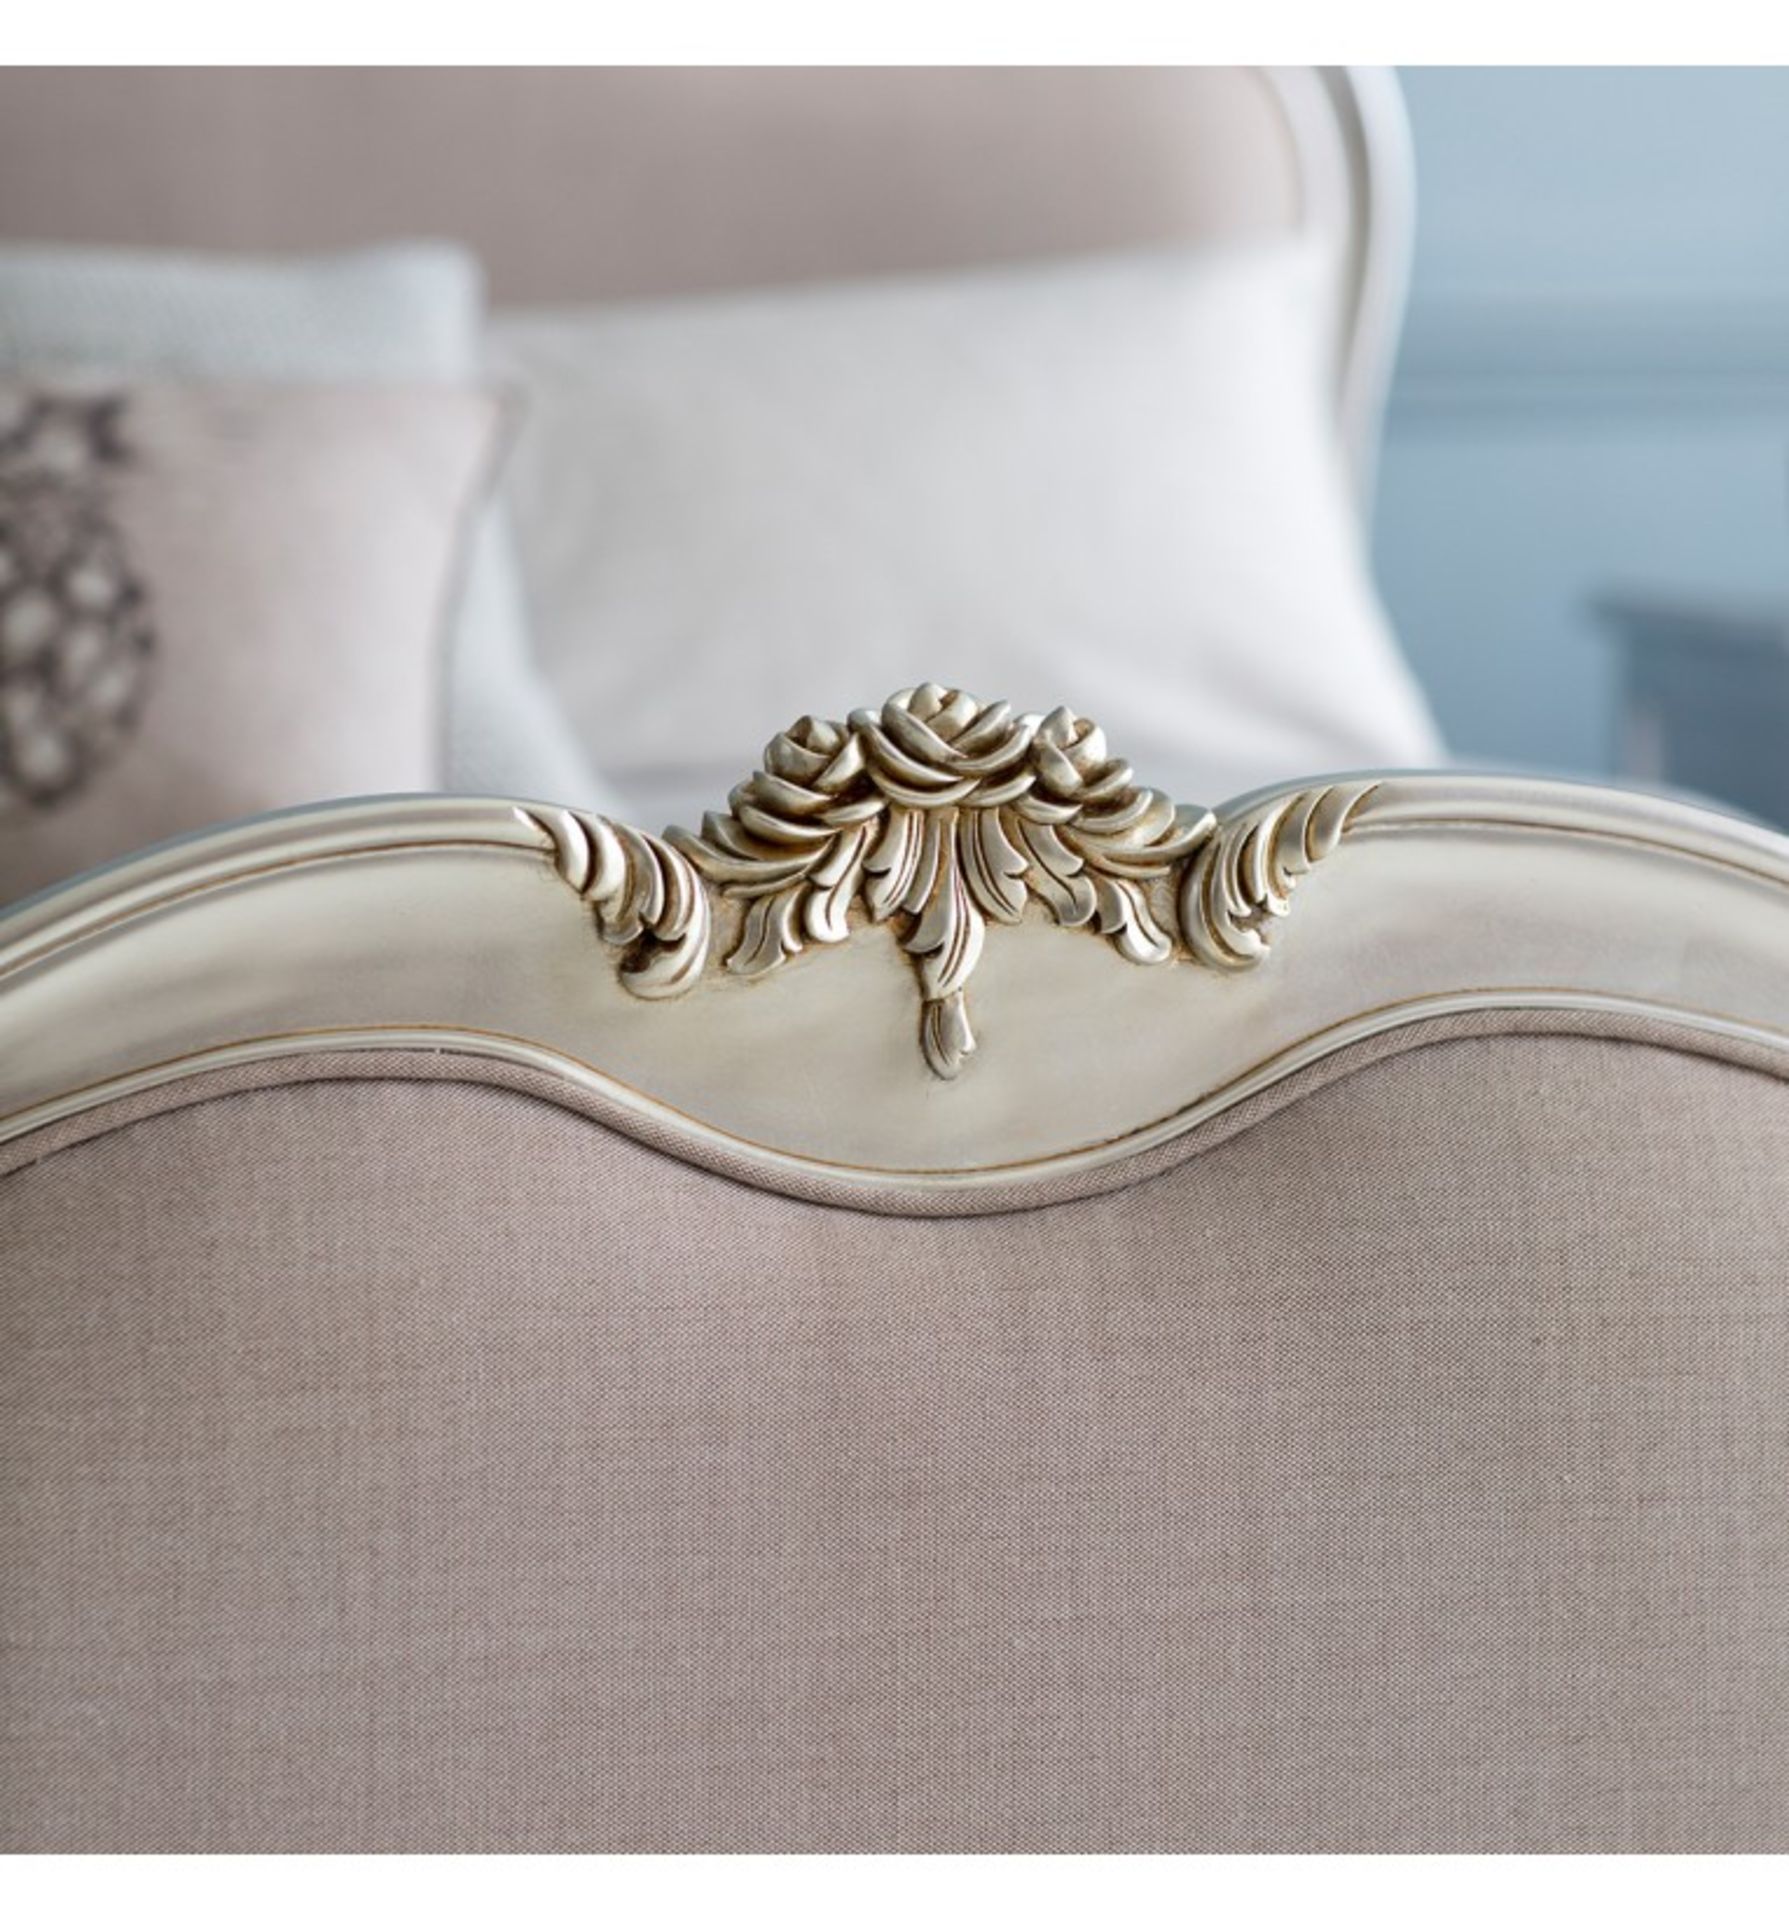 Hudson Chic 6' Superking Linen Upholstered Bed Silver Handcrafted with exquisite attention to detail - Image 2 of 2